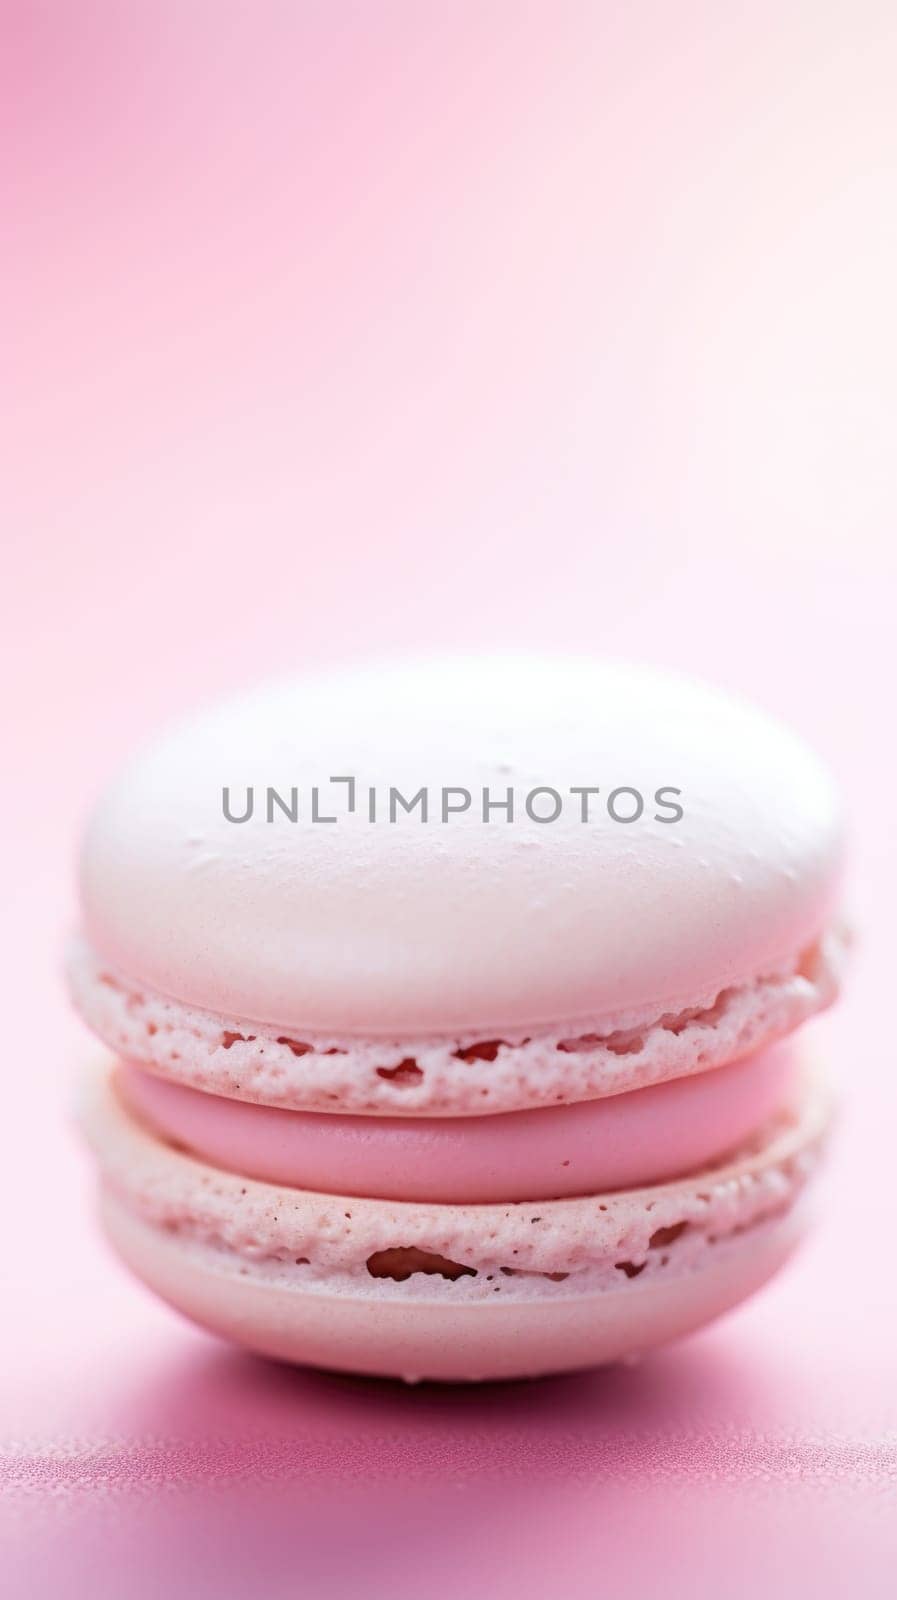 A close up of a macaron on a pink background, AI by starush